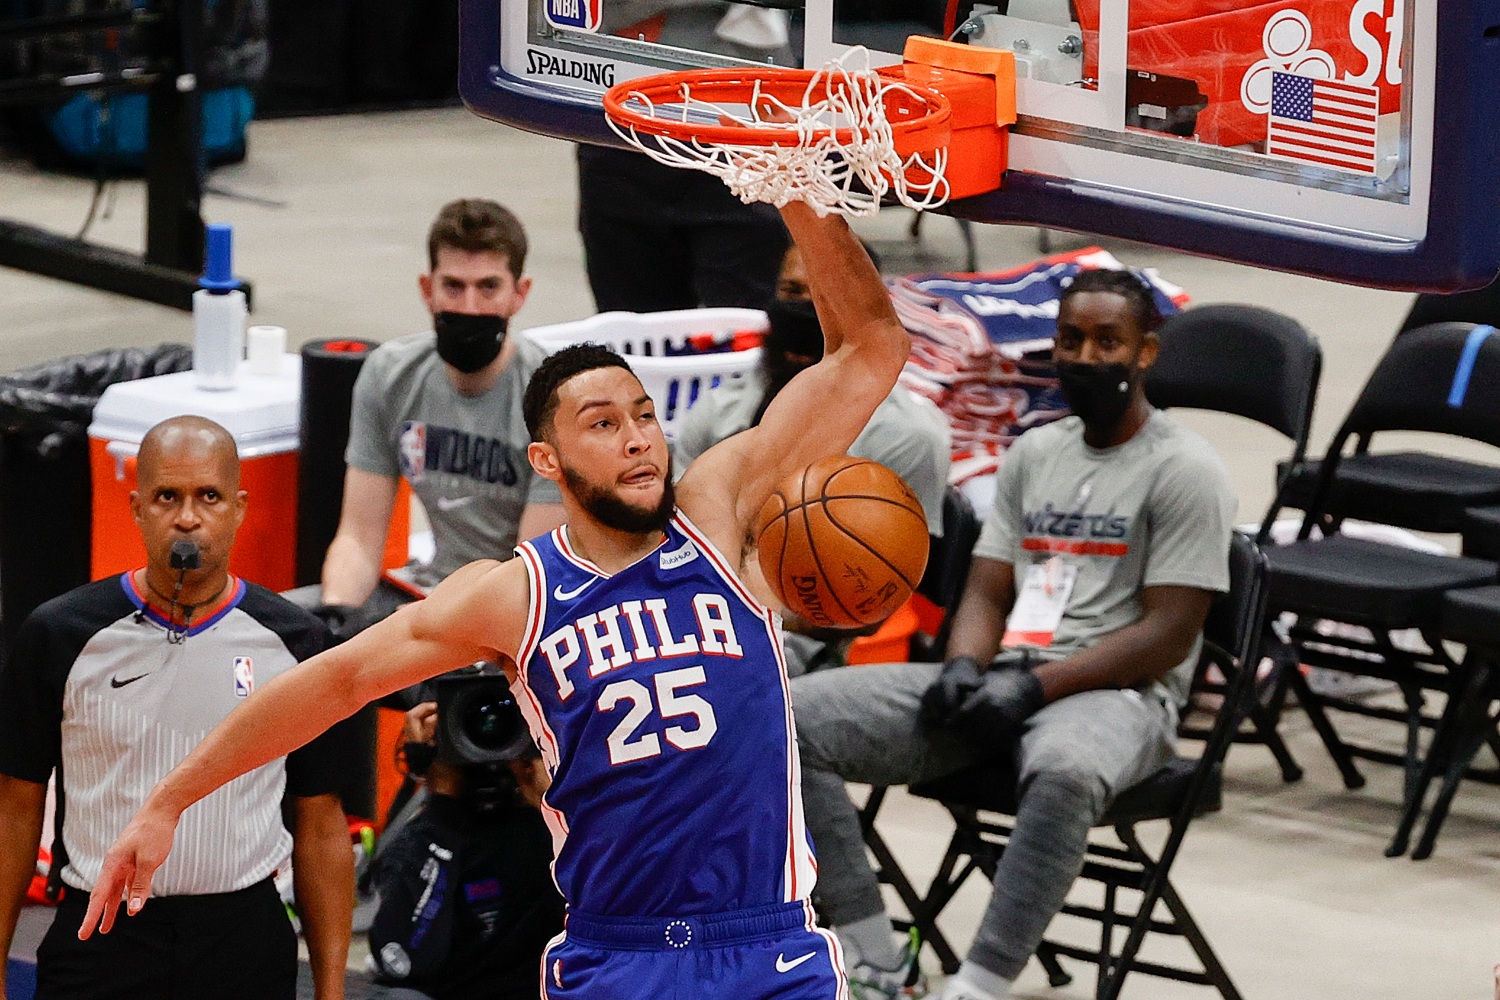 Sixers fans react to Ben Simmons as he reappears in Philadelphia after Holdout - CBS Philly